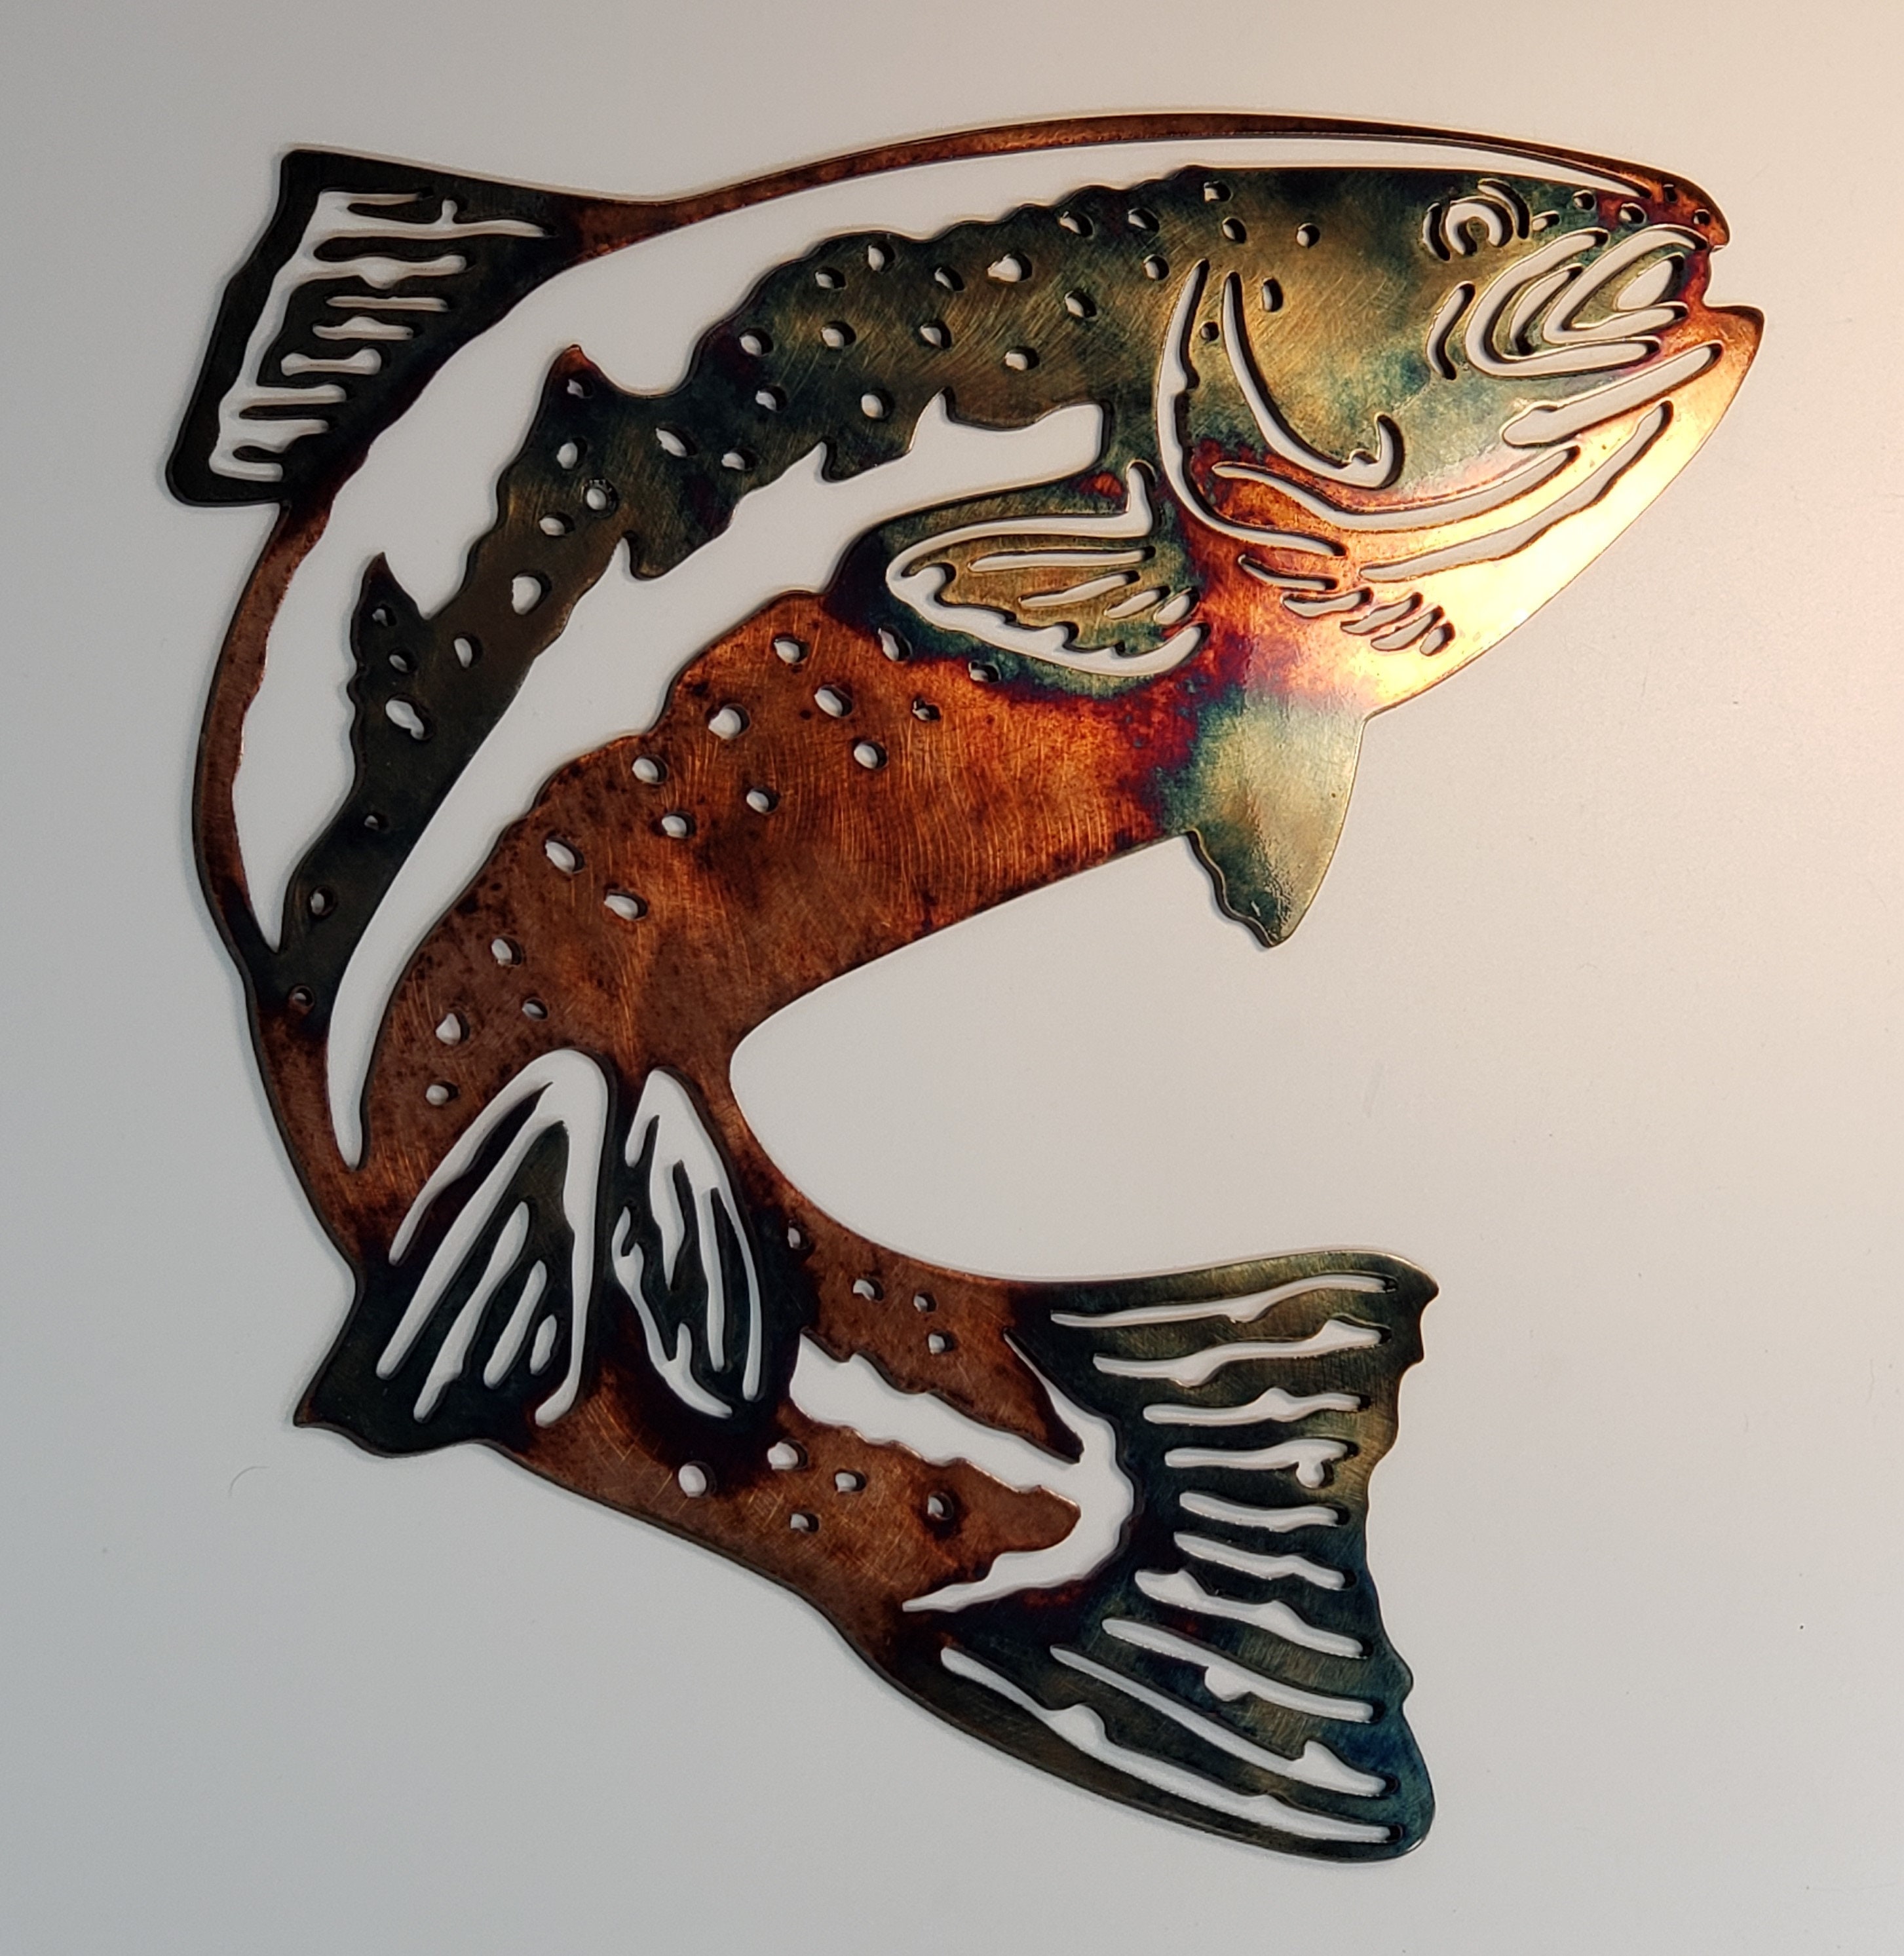 Aumei Wall Decor 12-Inch Wood Decorative Trout Fish Welcome Sign Hanging Plaque with 3 Hooks,for Garden and Wall Decor